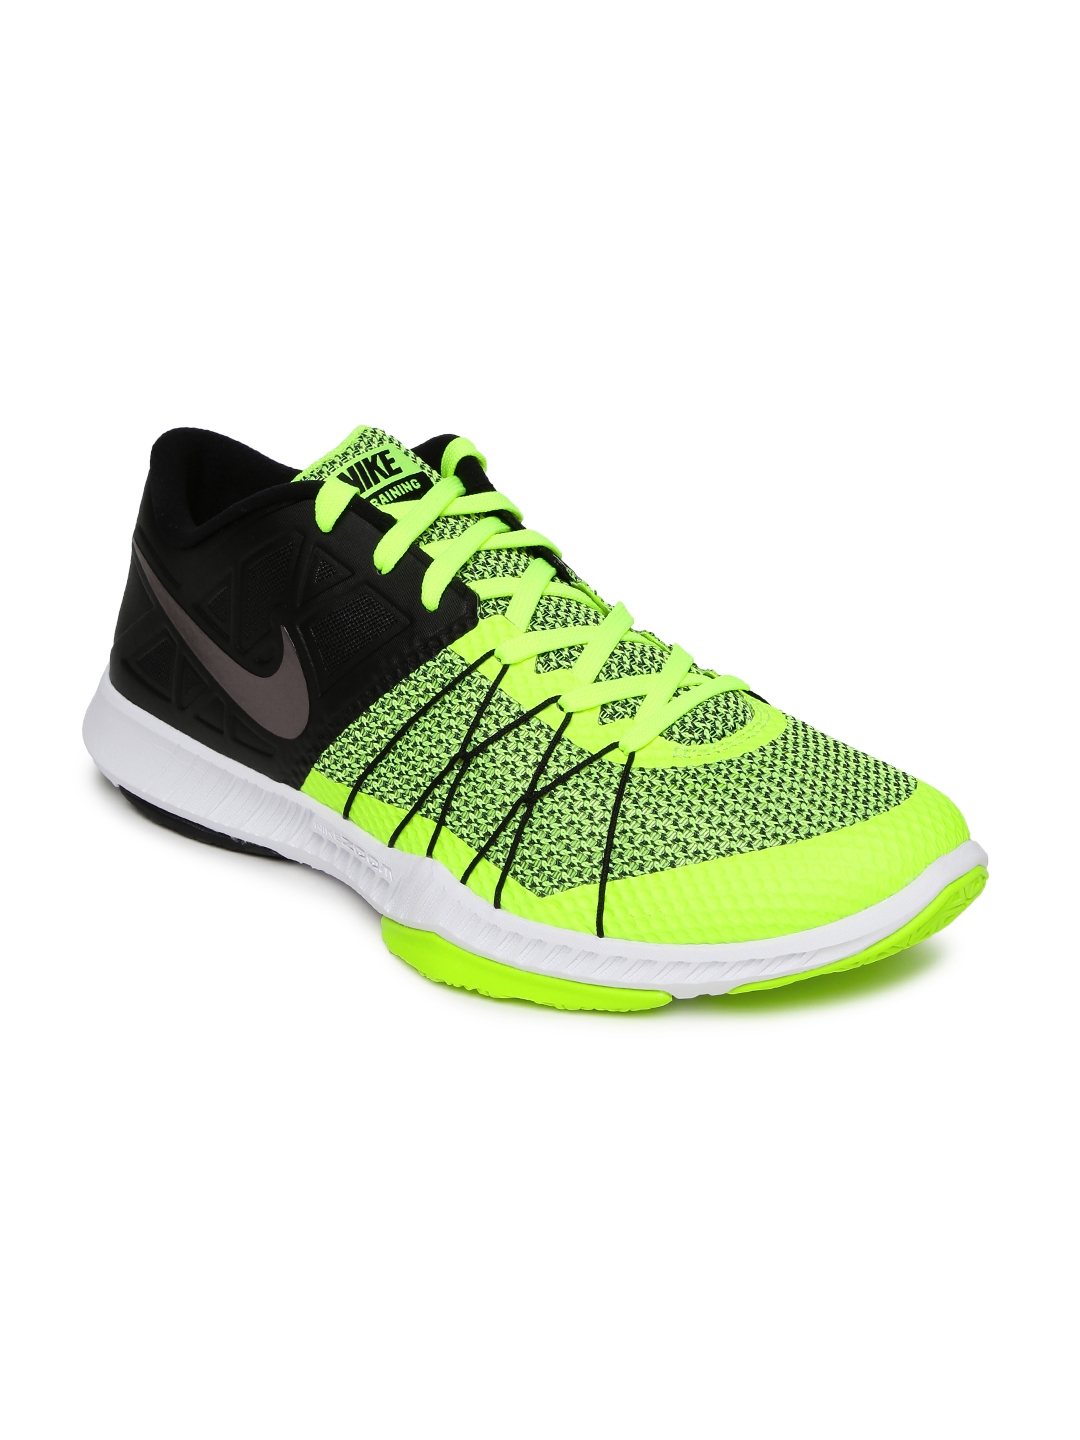 Nike Men Fluorescent Green & Black ZOOM TRAIN INCREDIBLY FAST Training Shoes - Sports Shoes for Men | Myntra